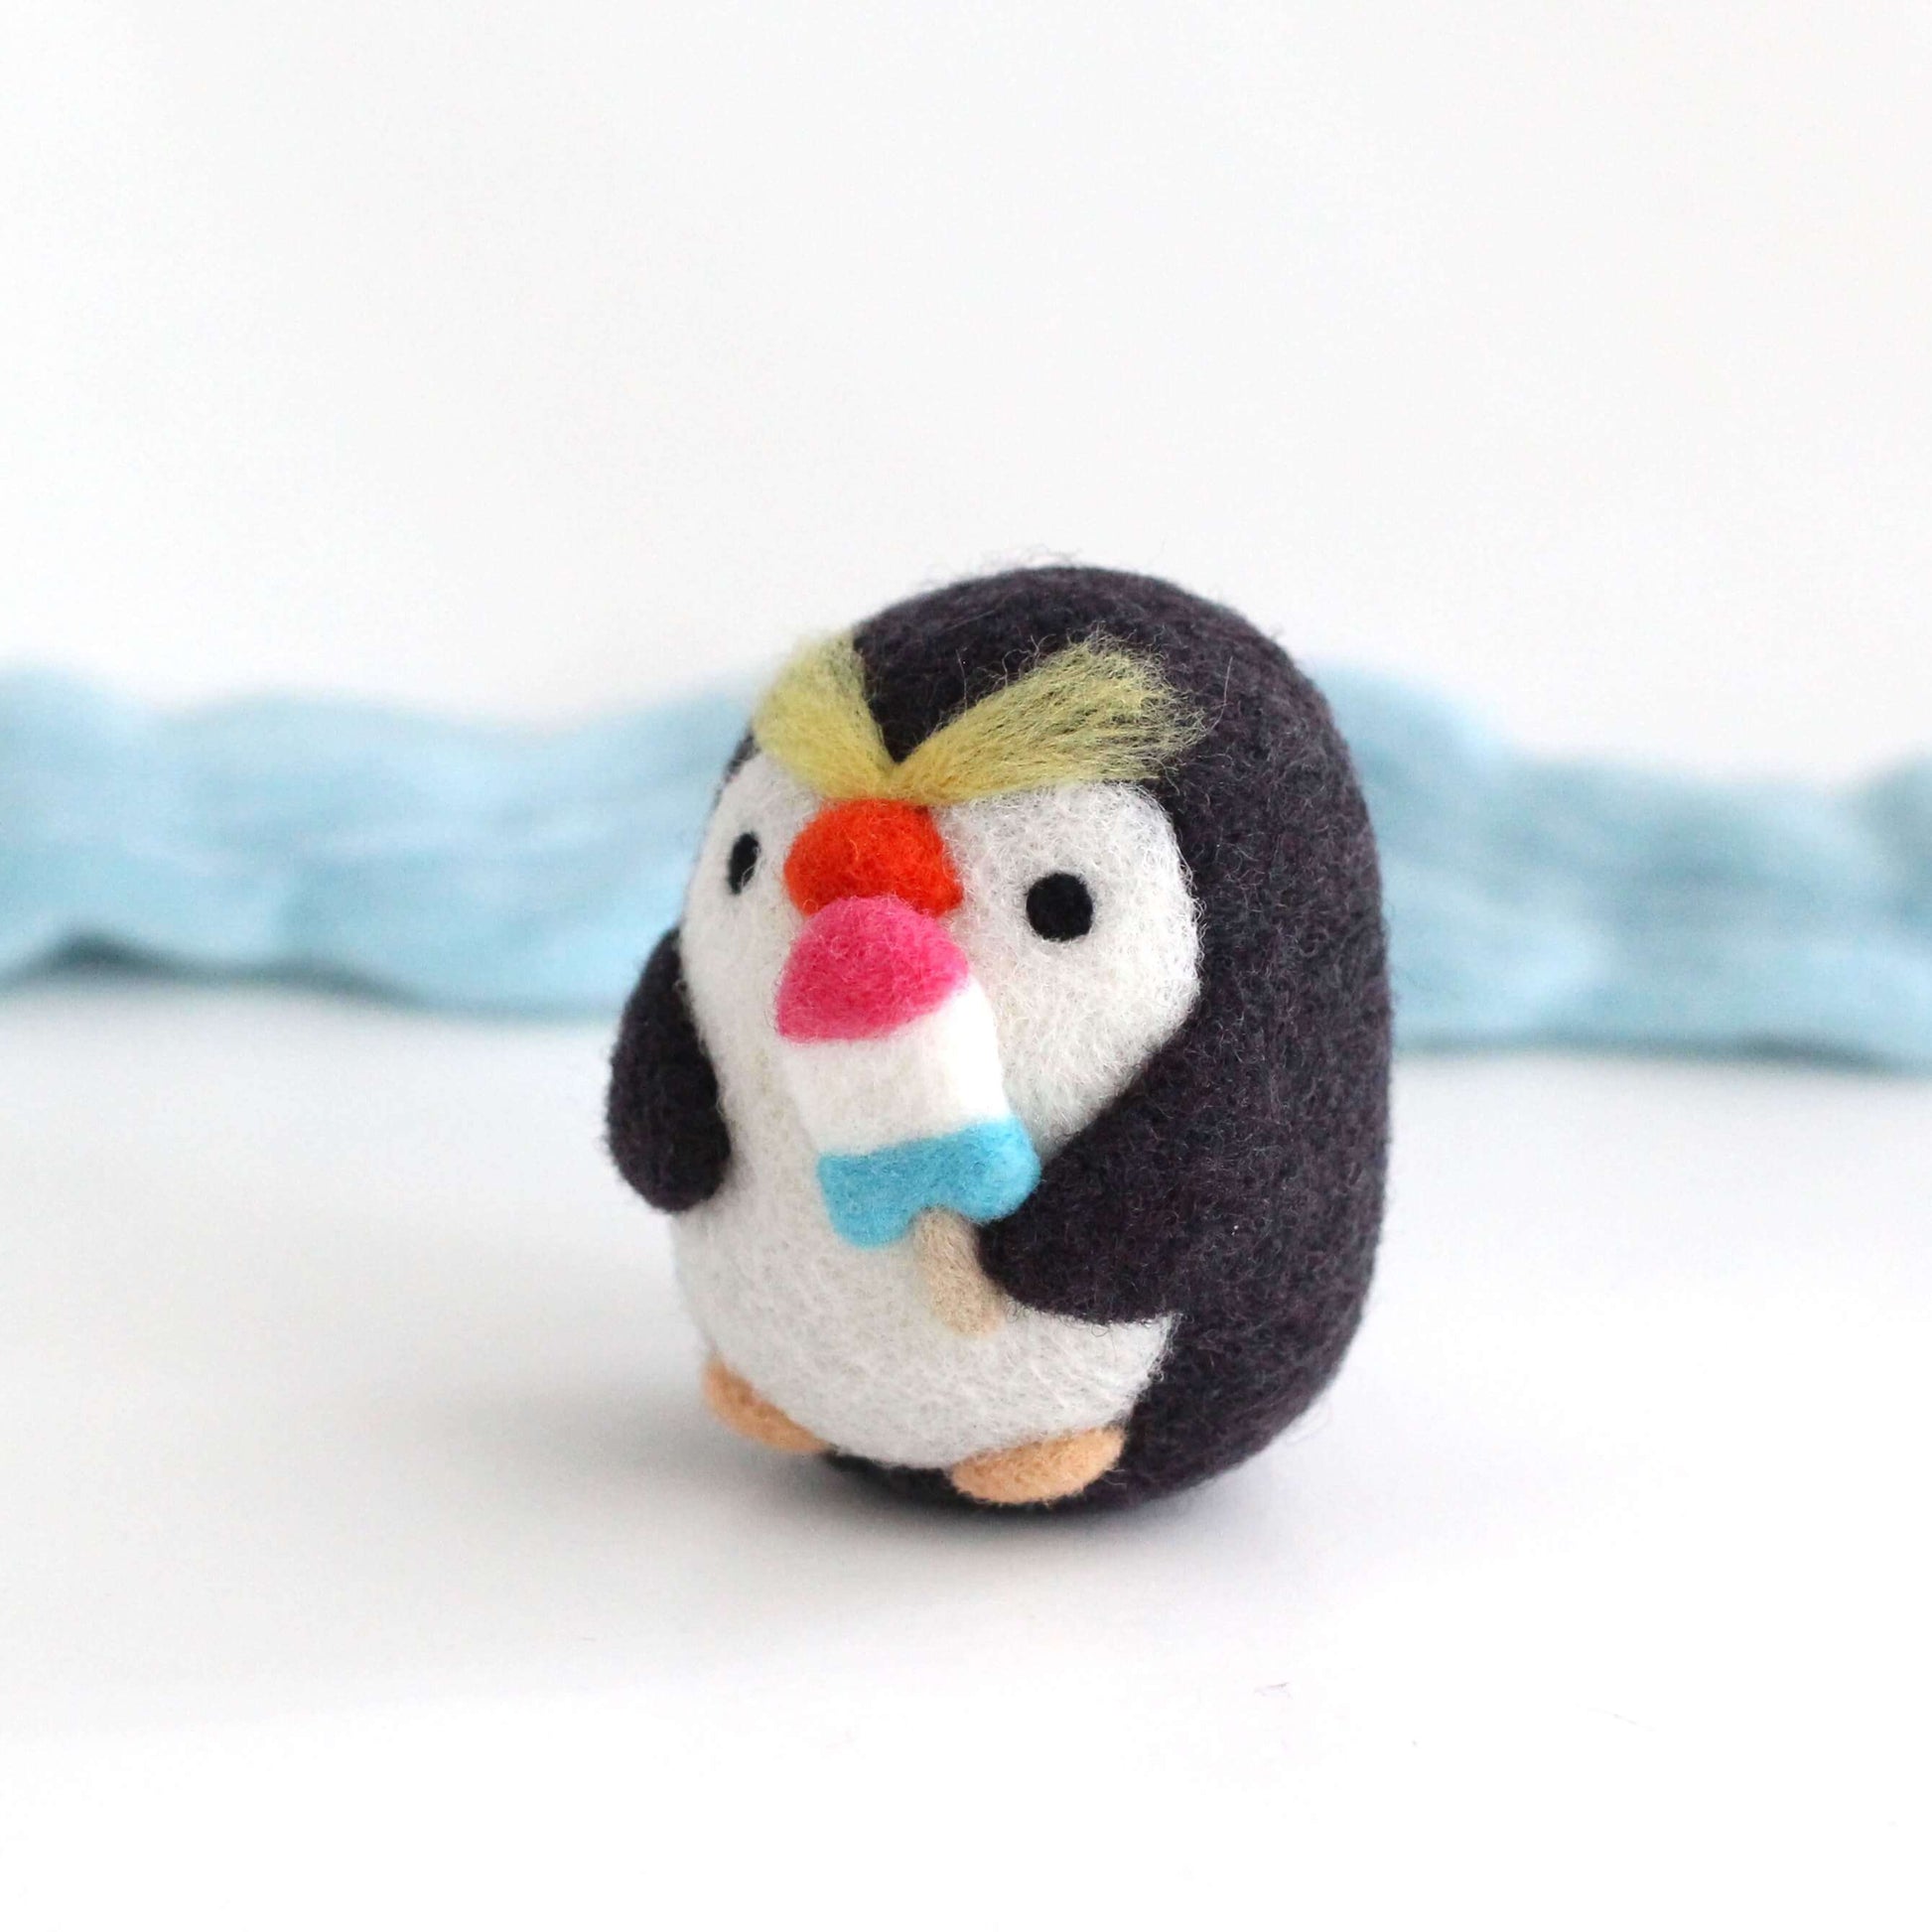 Needle Felted Royal Penguin with Rocket Fish Pop by Wild Whimsy Woolies